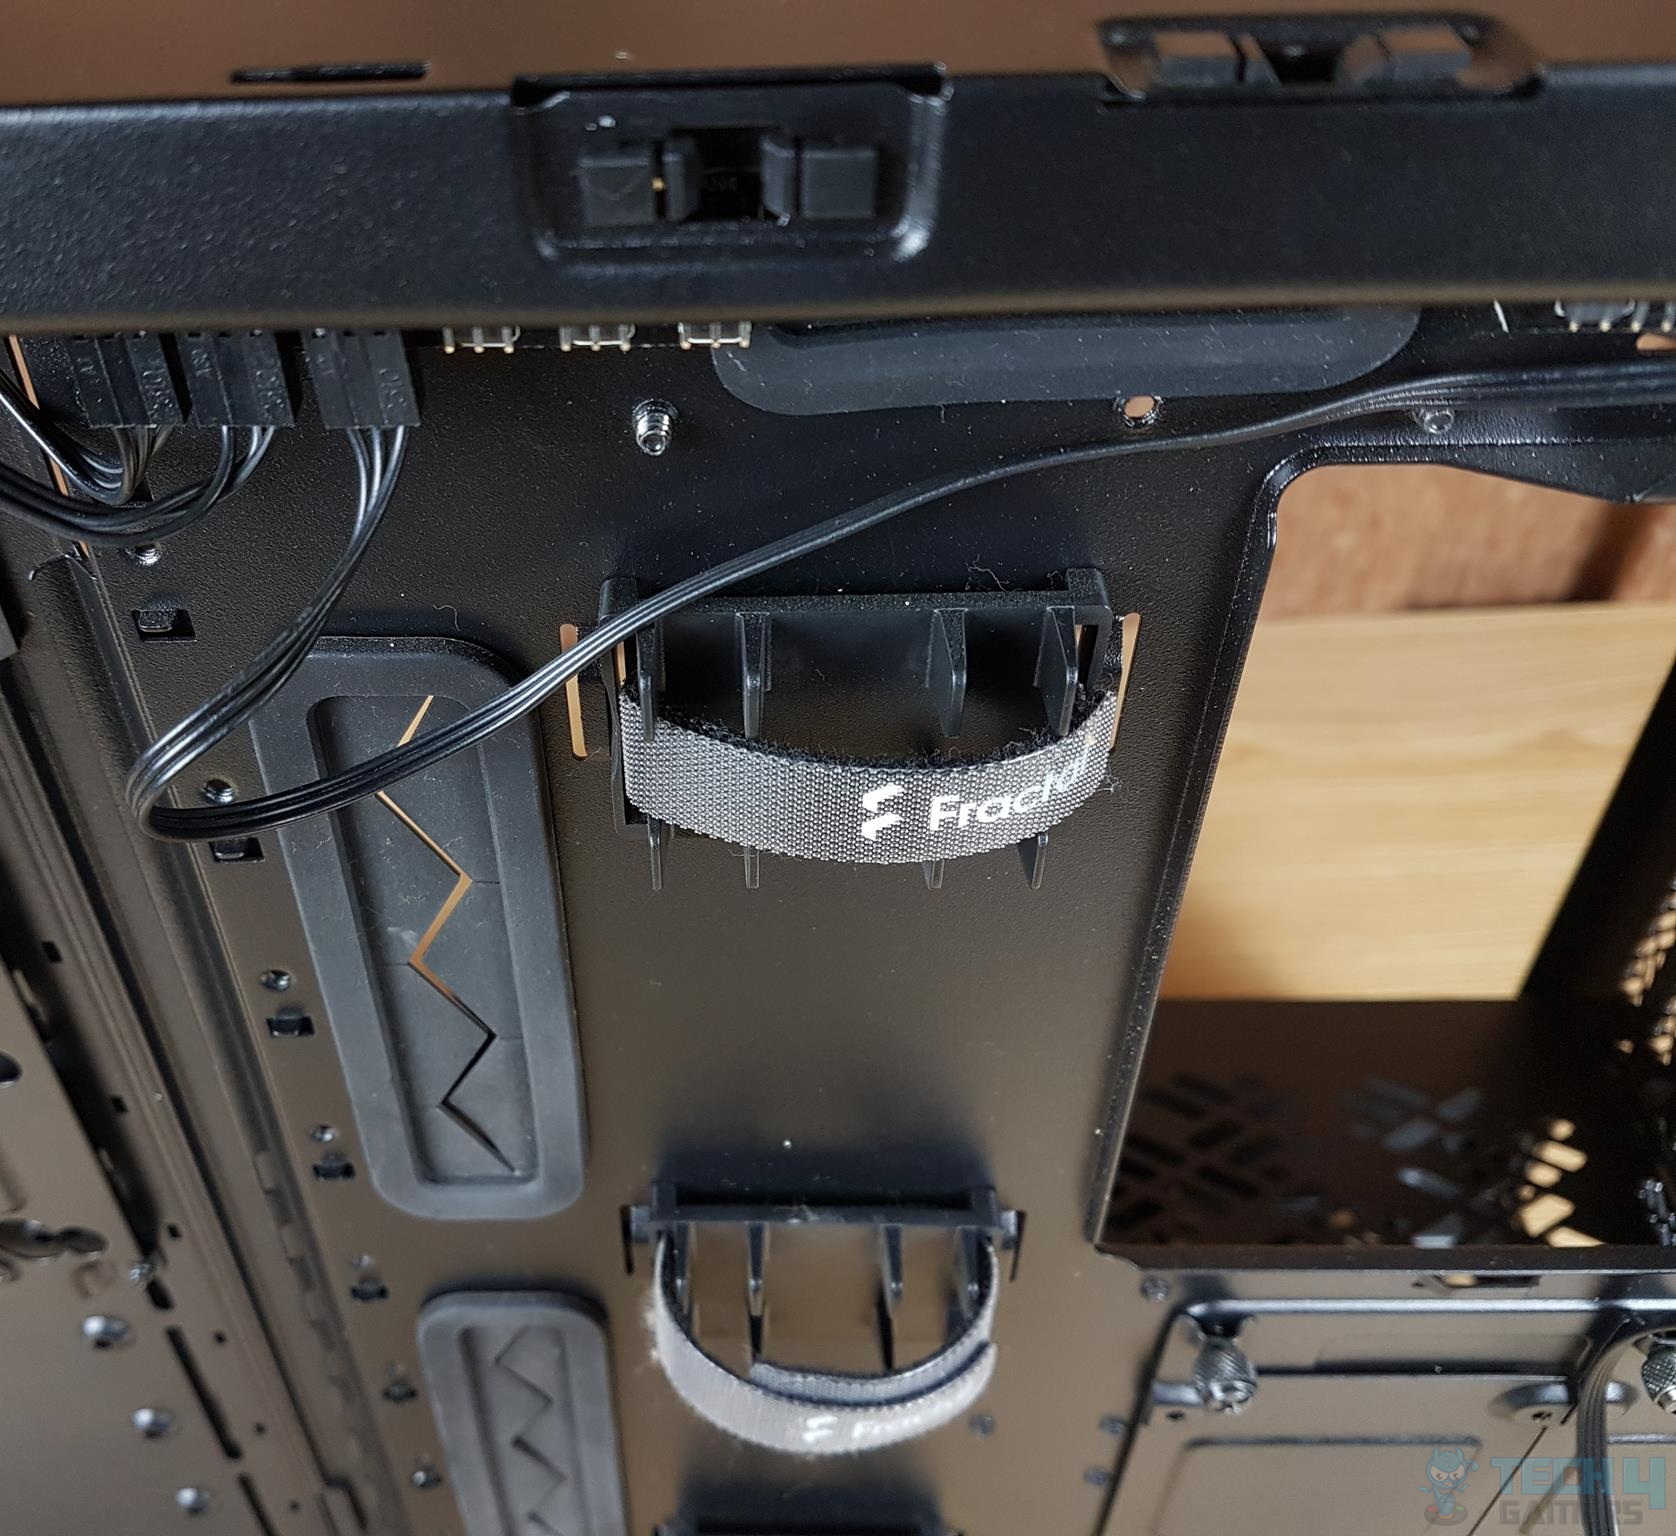 Fractal Design Meshify 2 — Velcro straps for integrated cable guide